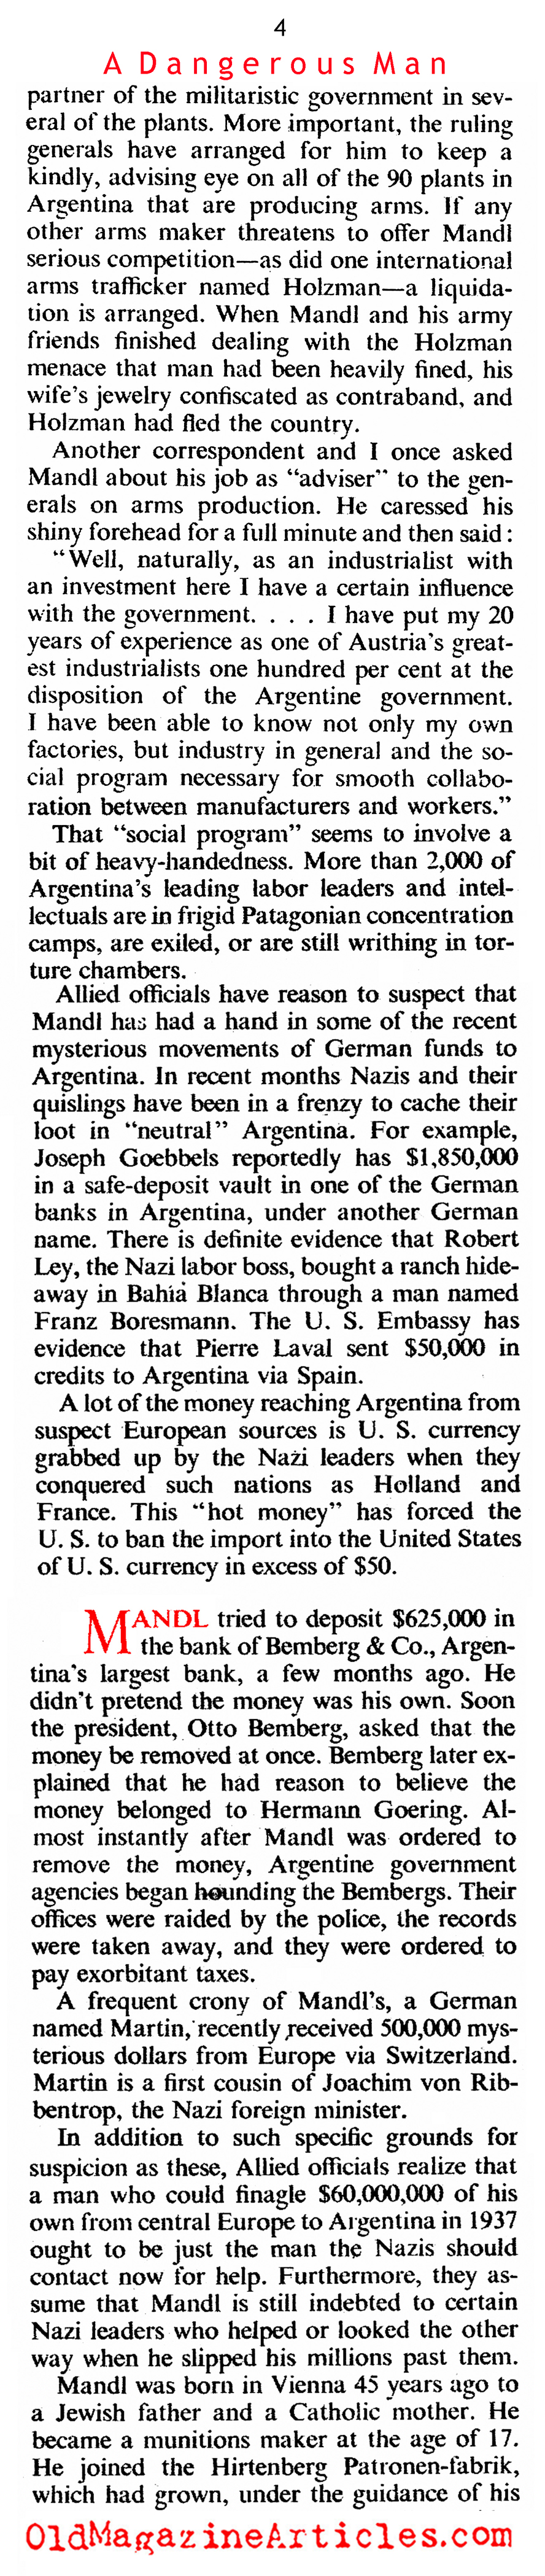 Hitler's Man in Buenos Aires (American Magazine, 1945)